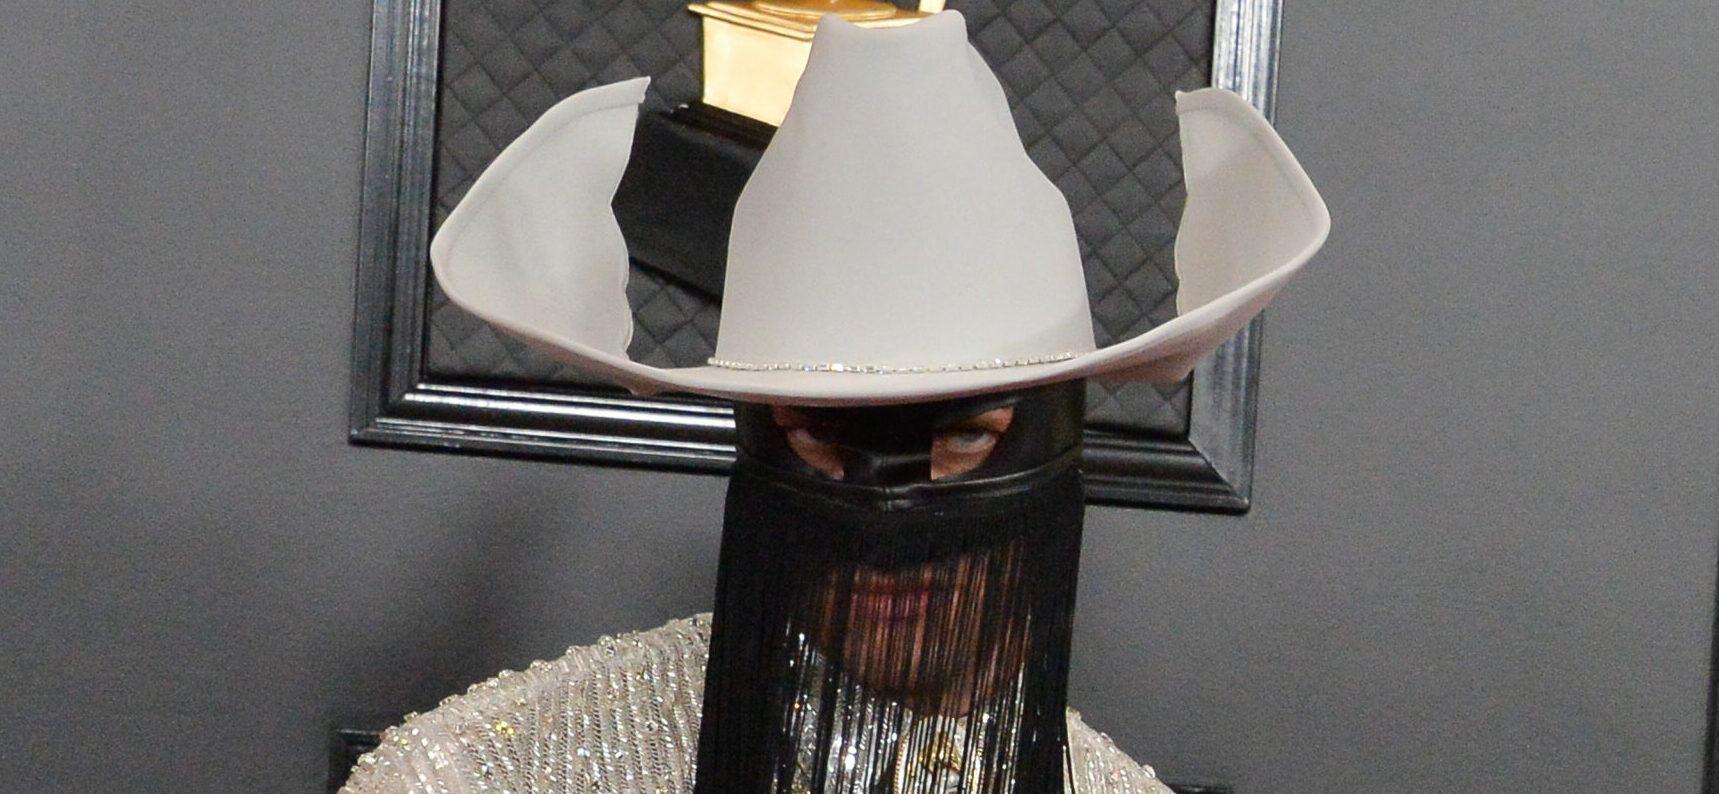 Country Music Star Orville Peck Postpones Tour For ‘Mental And Physical Health’